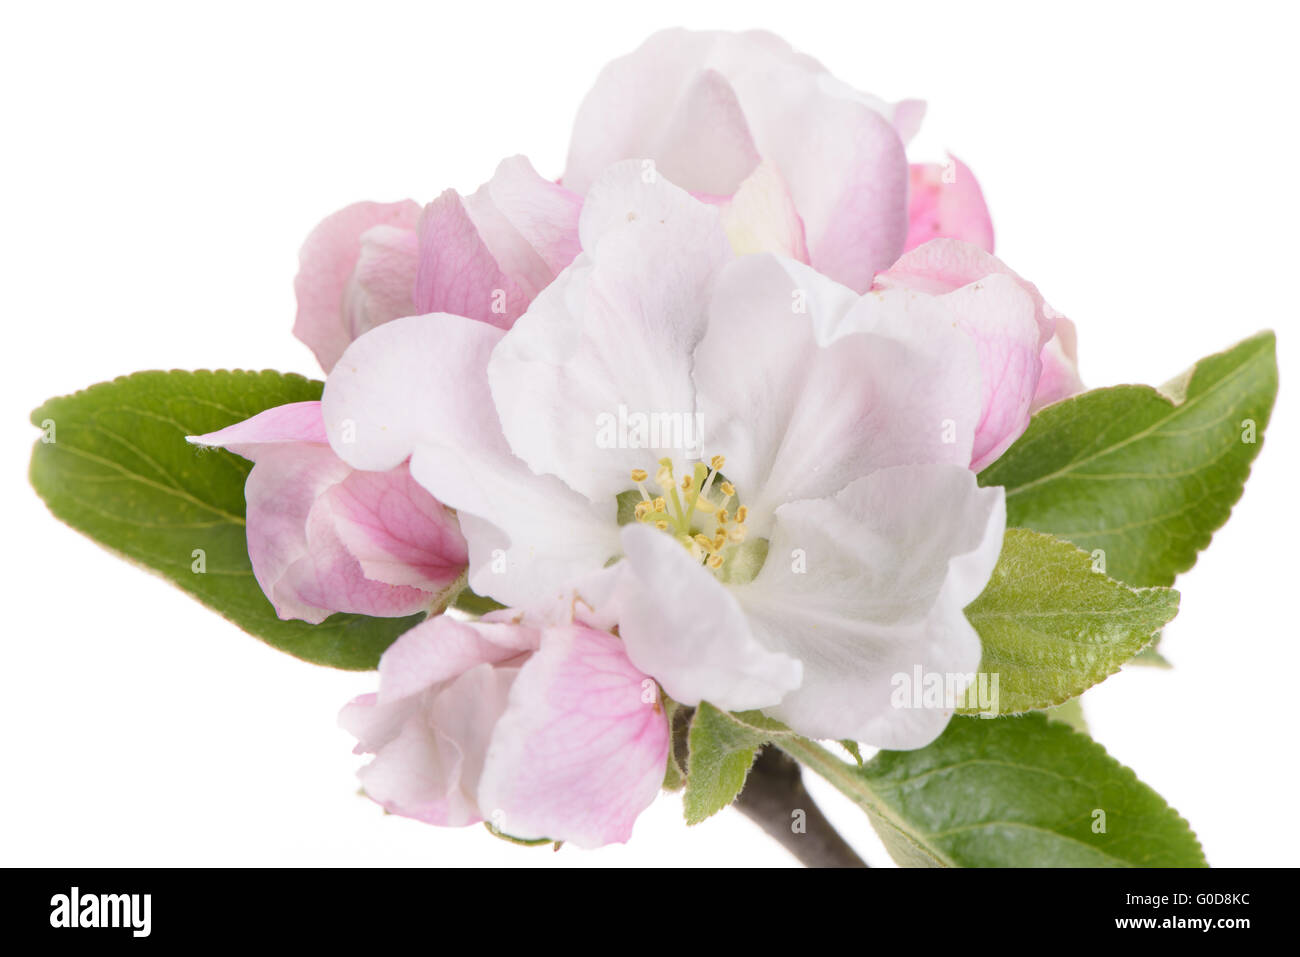 blooming of apple tree Stock Photo